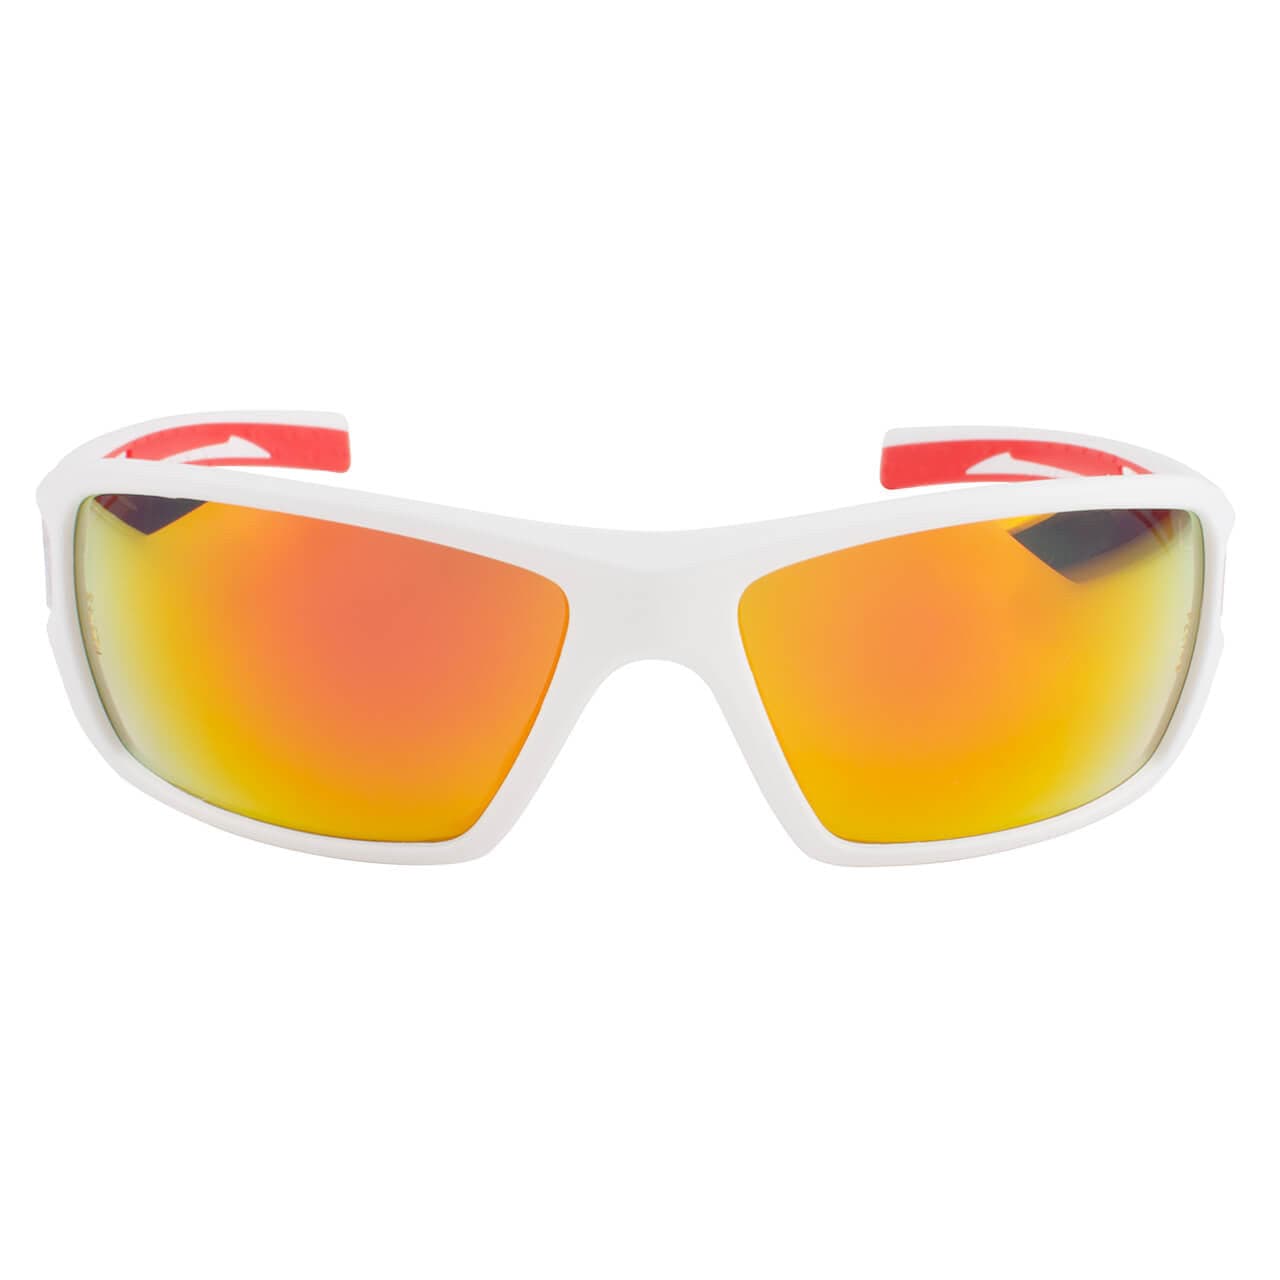 Metel M30 Safety Glasses with White Frame and Orange Mirror Lenses Front View